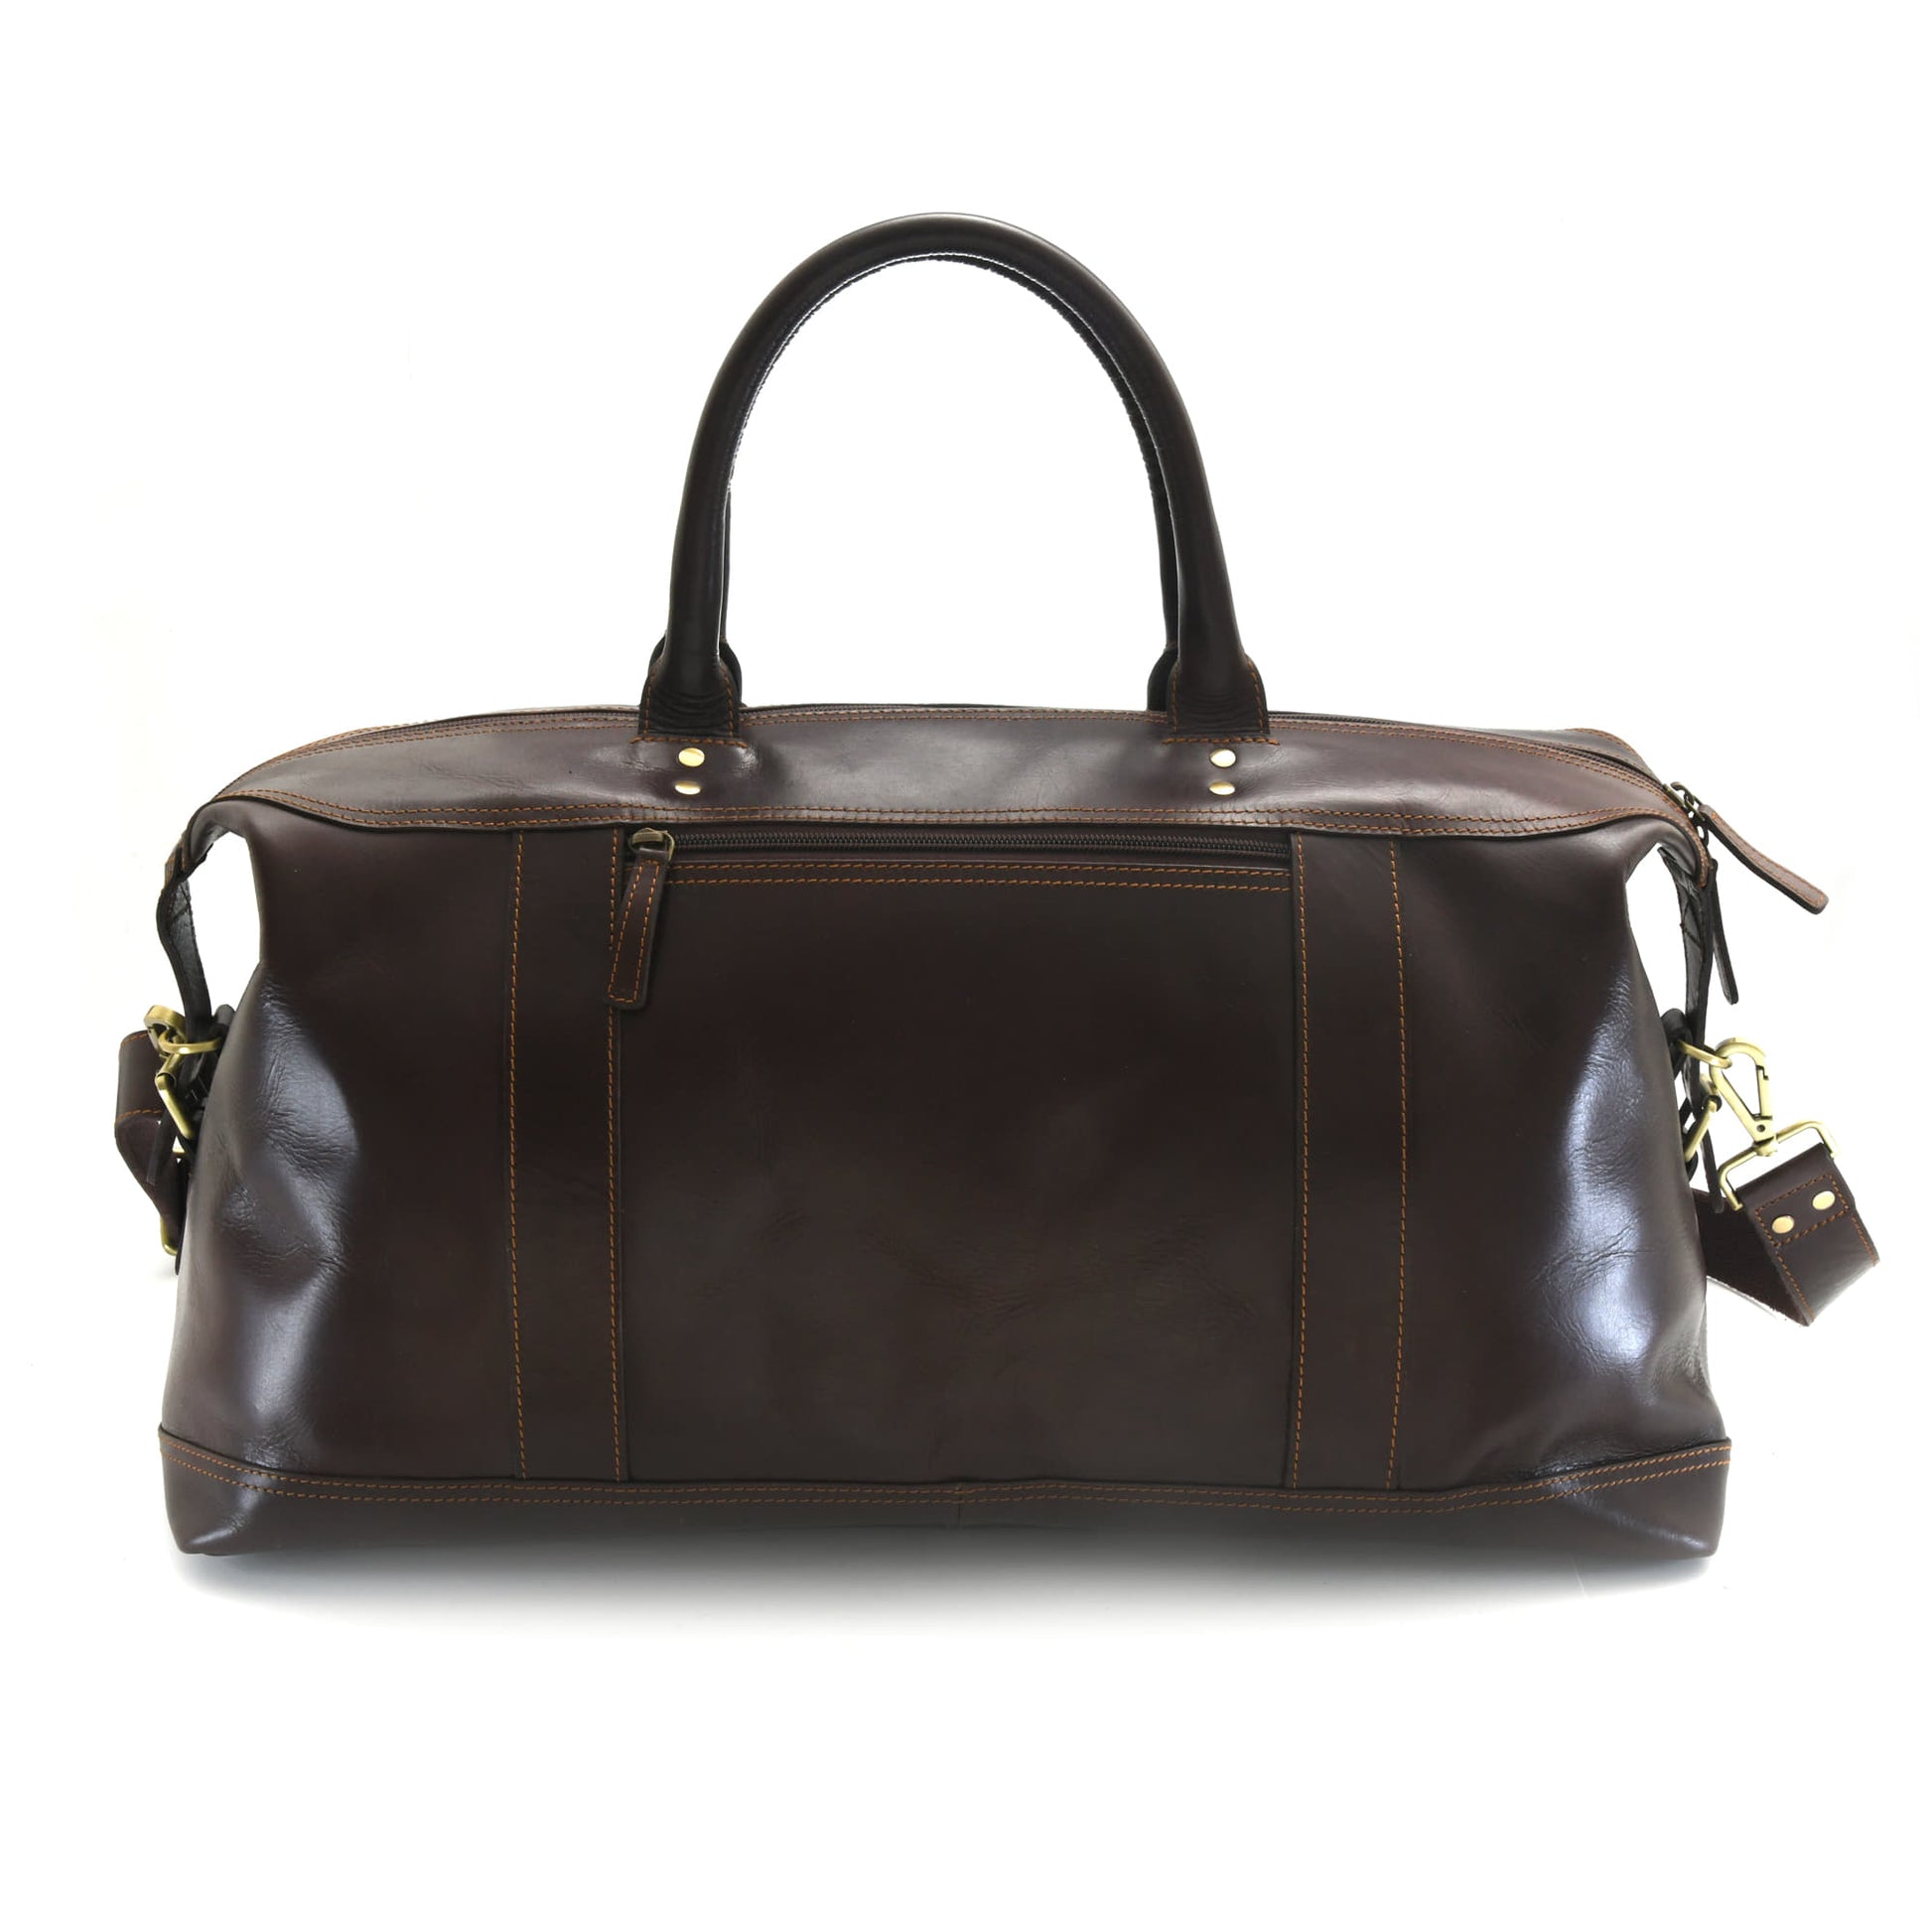 Style n Craft 392100 Large Duffle Bag in Full Grain Dark Brown Leather - Back View Showing the Back Outside Zipper Pocket